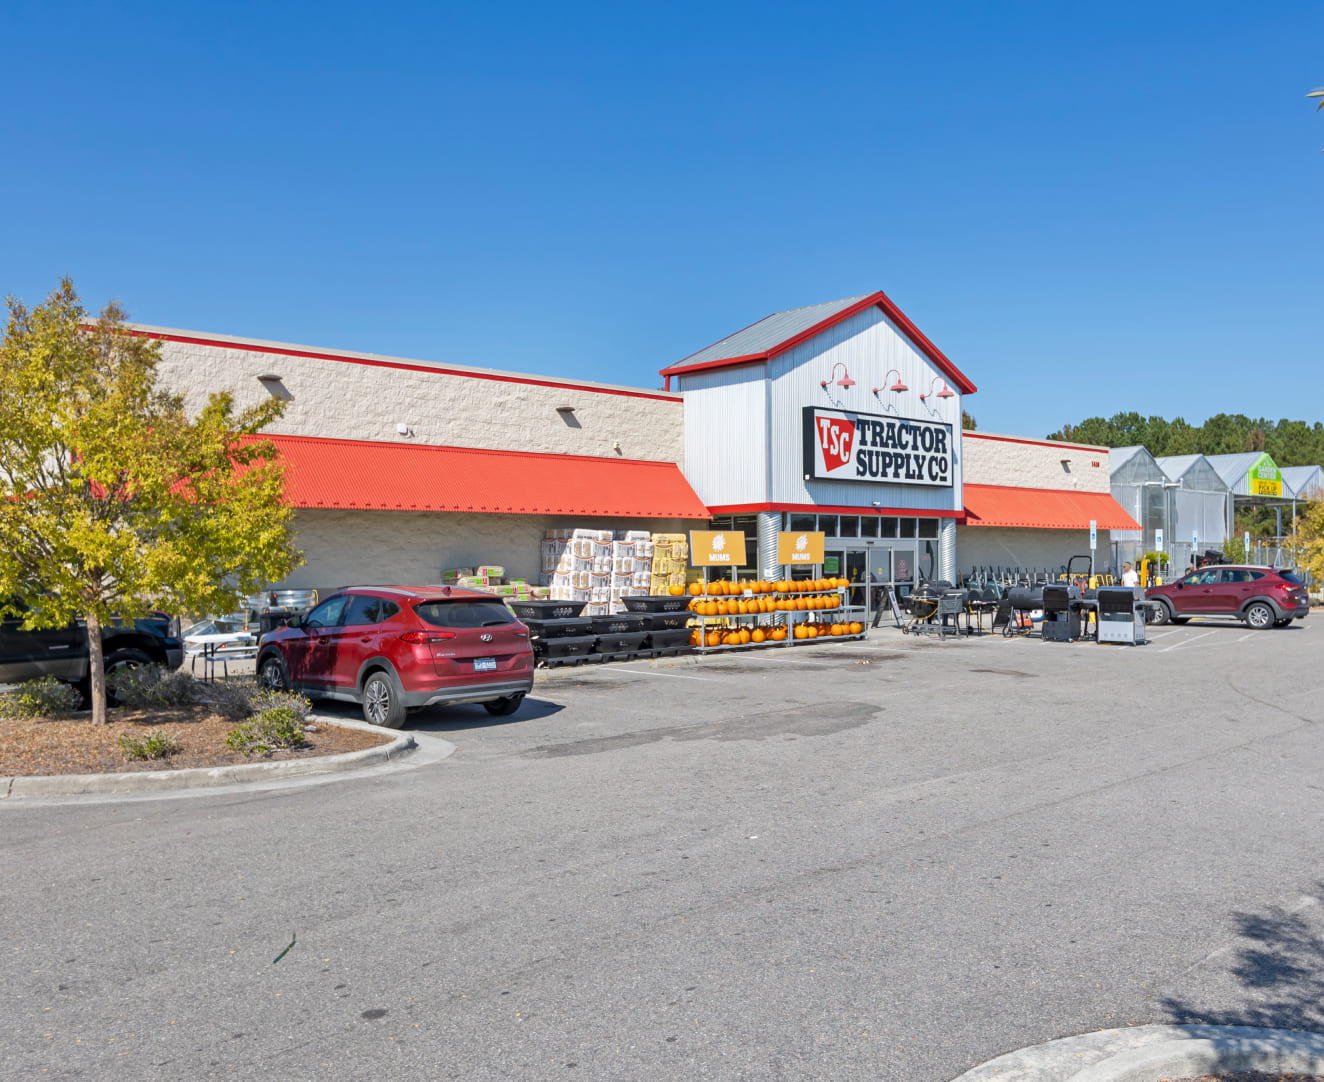 Another view from the left side of Tractor Supply Company at 7965 US Highway 117 in Rocky Point, NC.